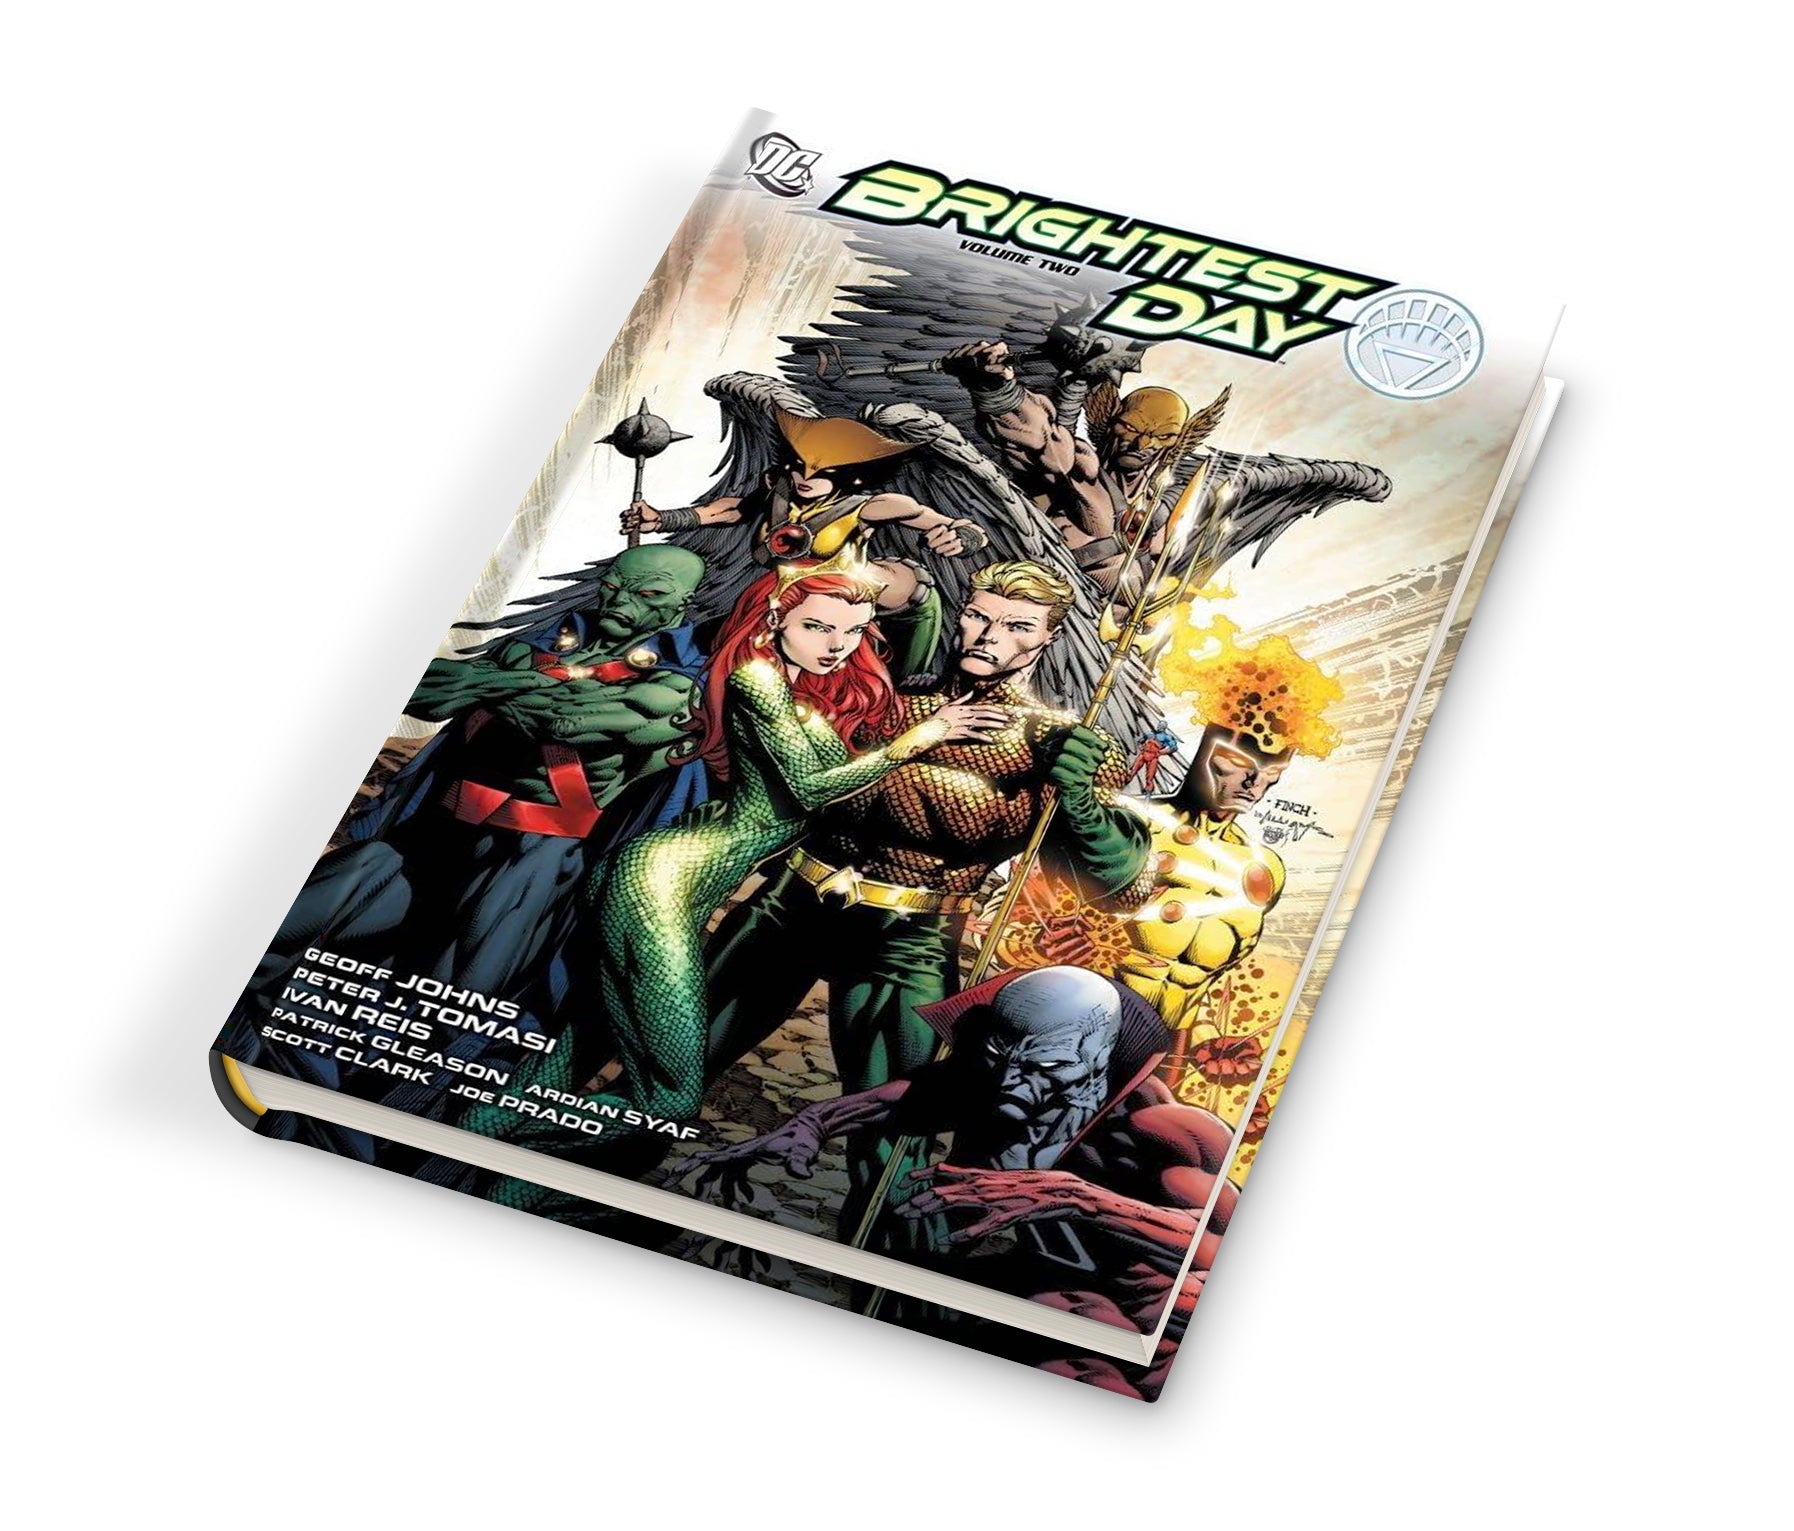 BRIGHTEST DAY 2 (Hardcover)